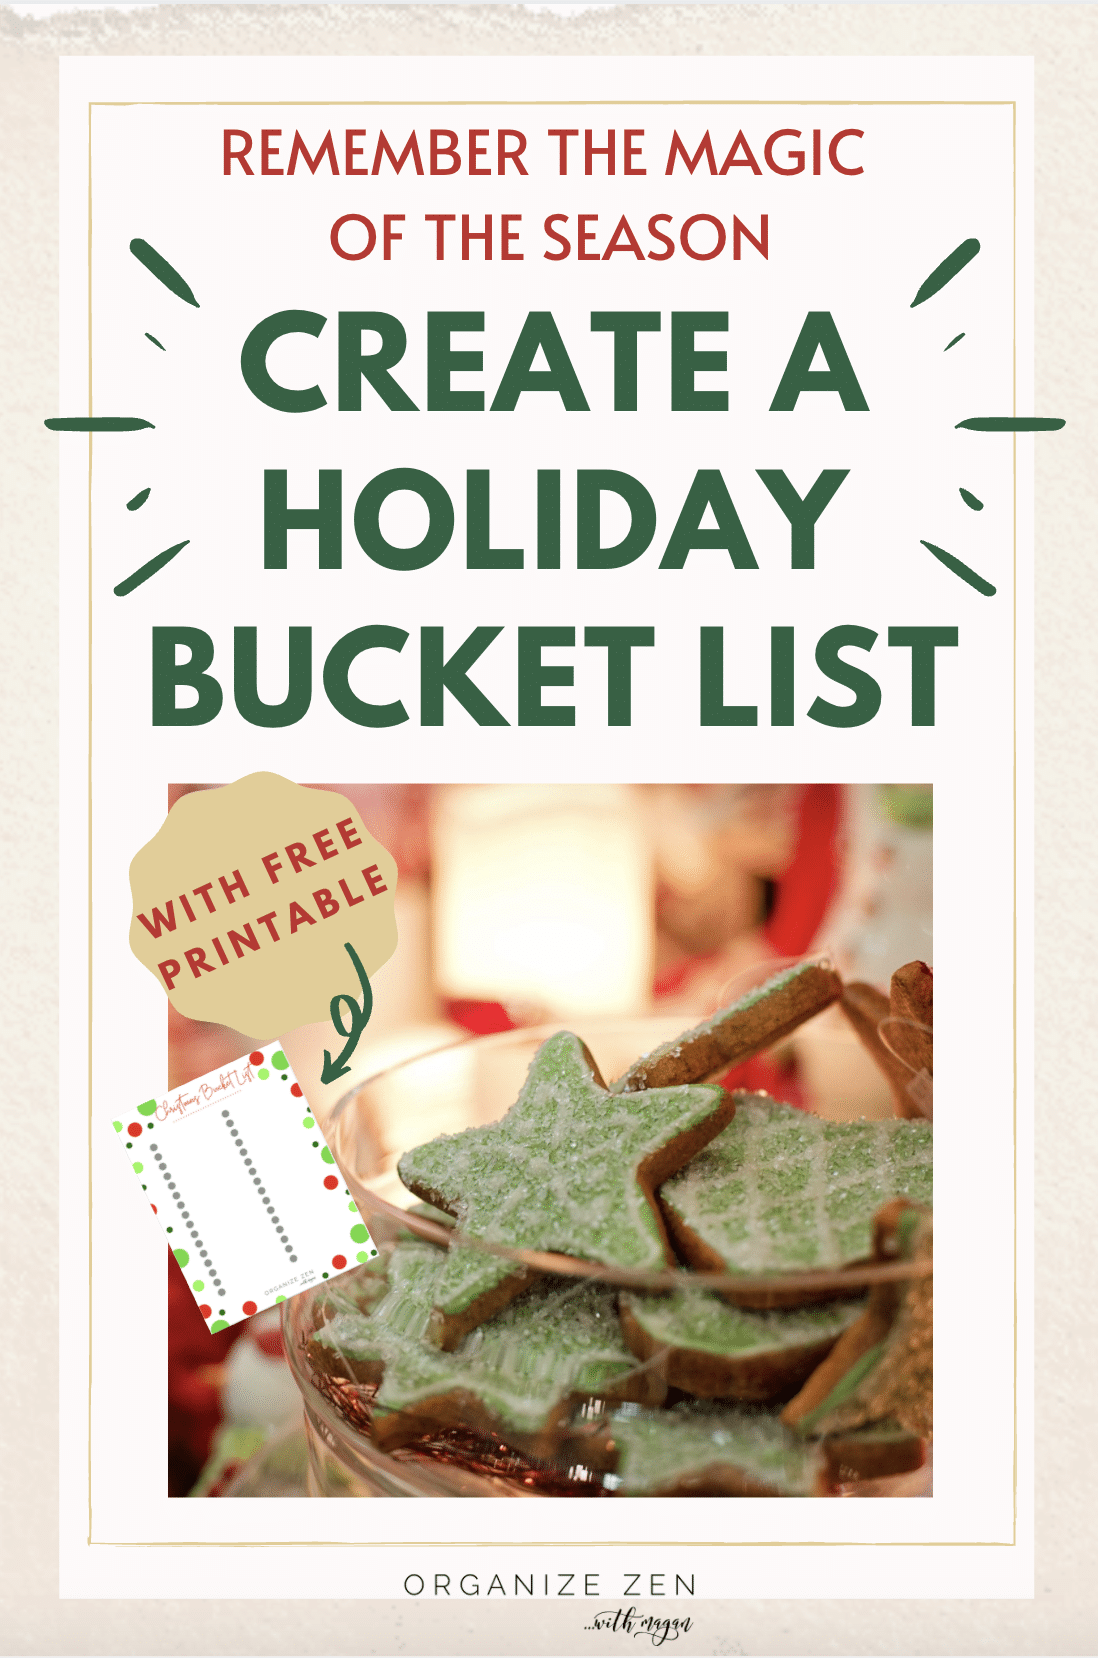 How to create a family holiday bucket list